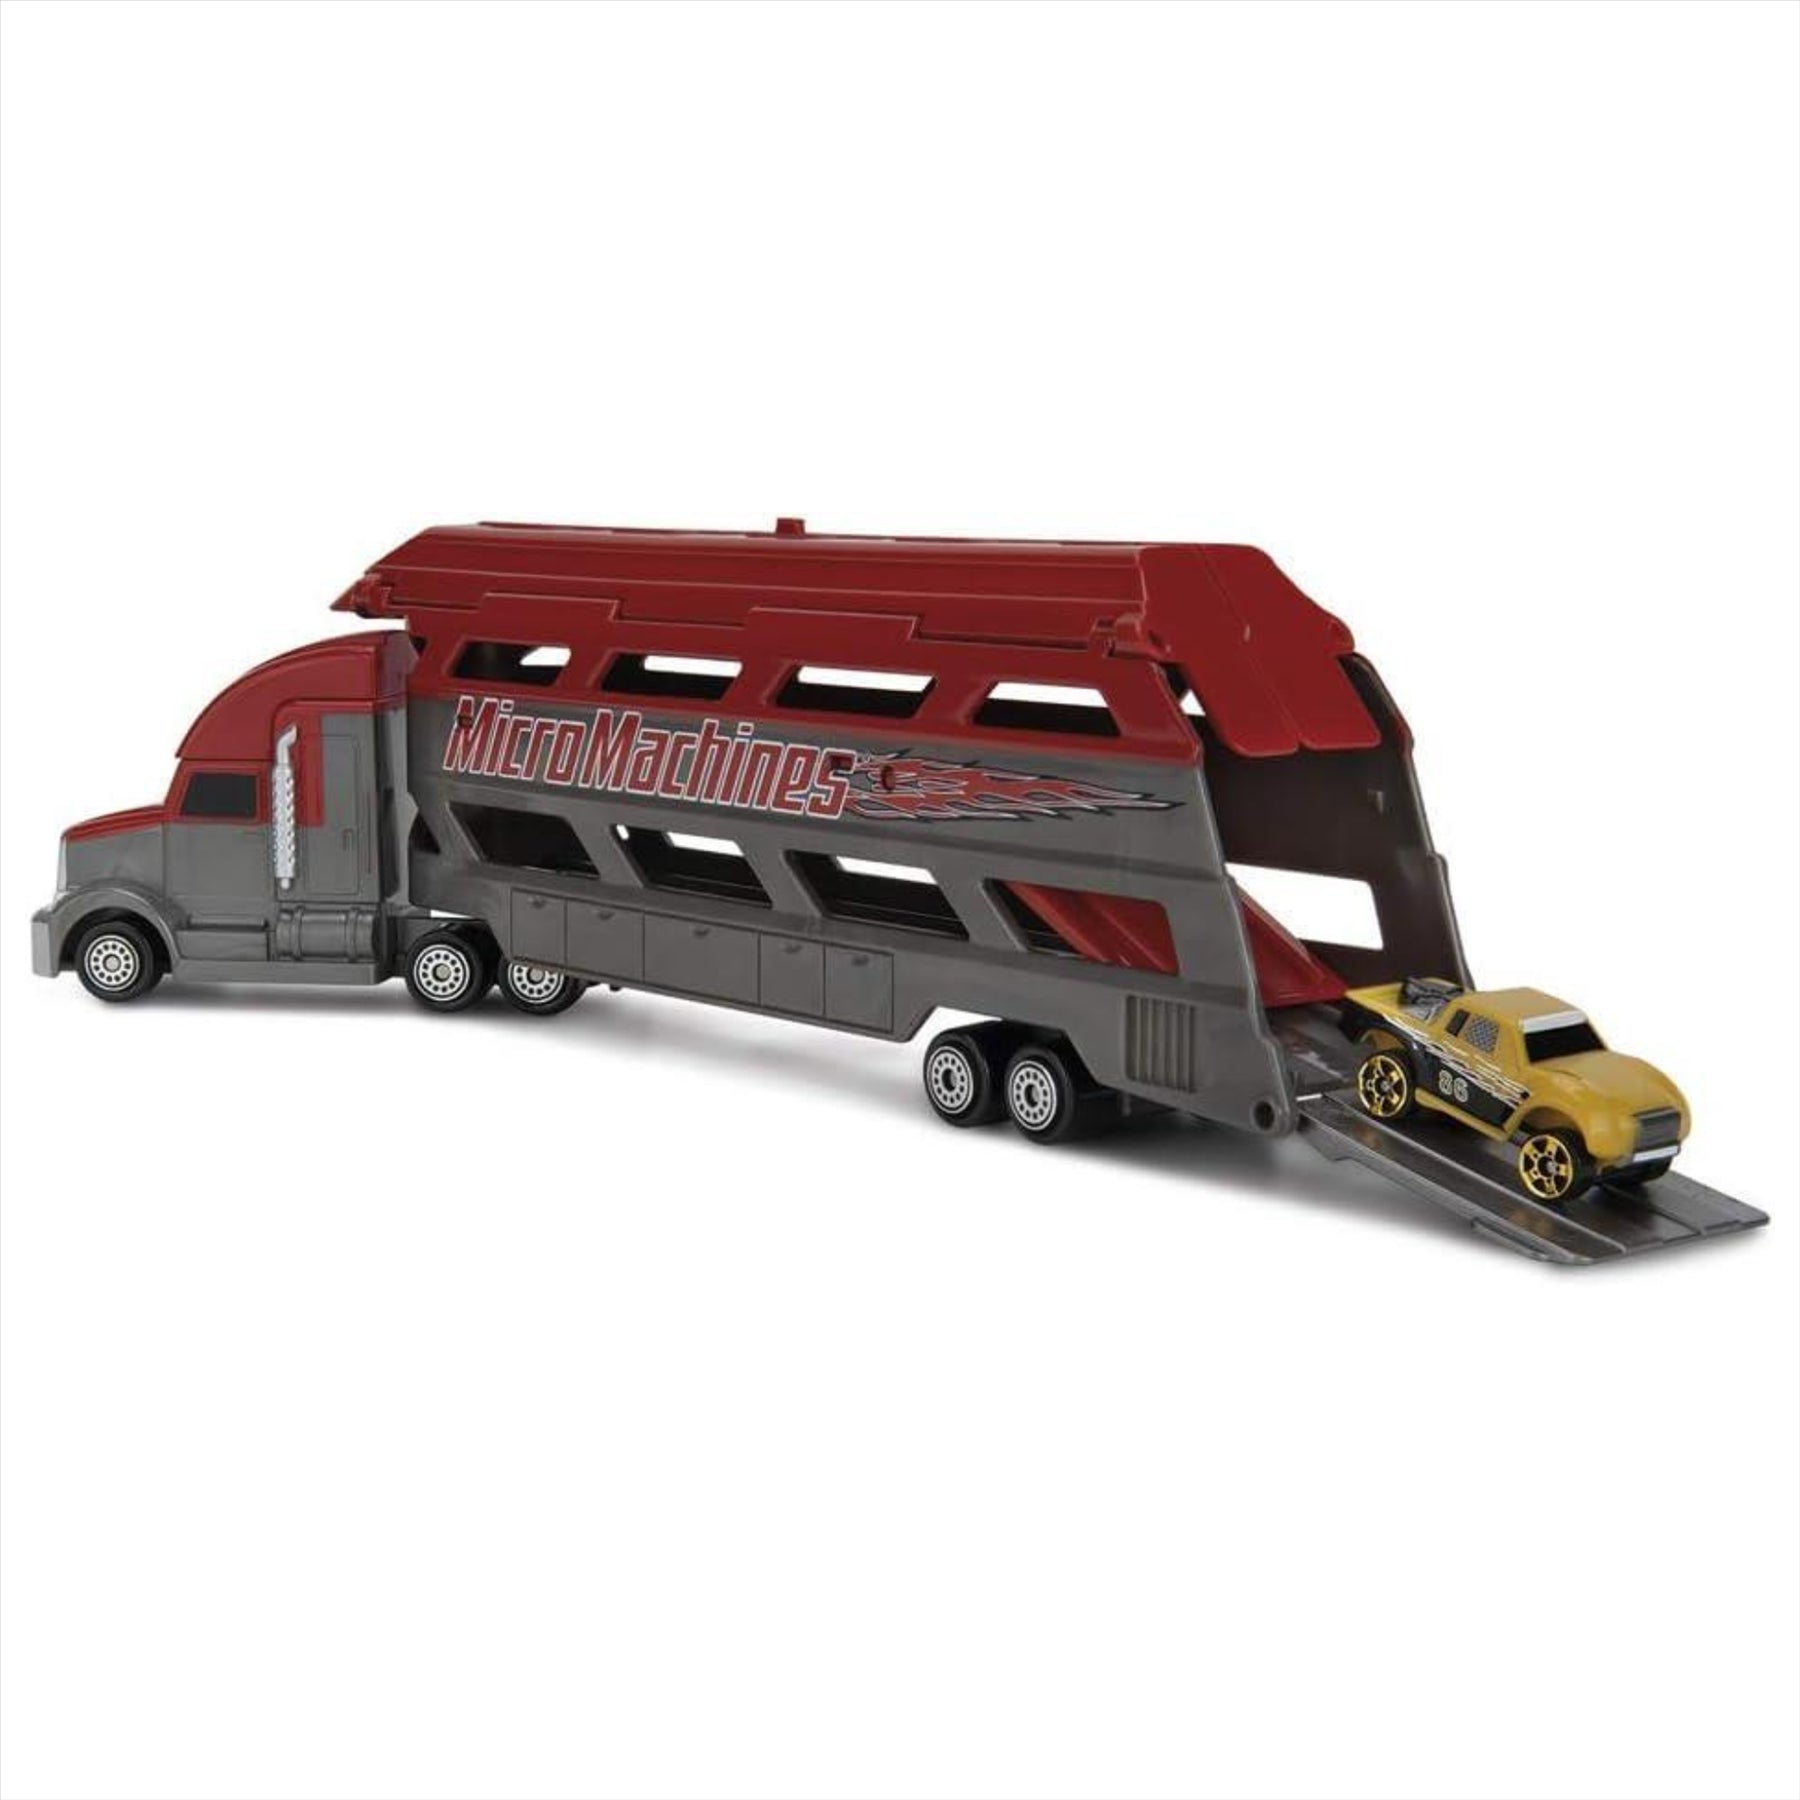 Micro Machines Starter Pack, Mini Red Hauler - Includes 2 Vehicles, Lorry & Exclusive Car - Toptoys2u